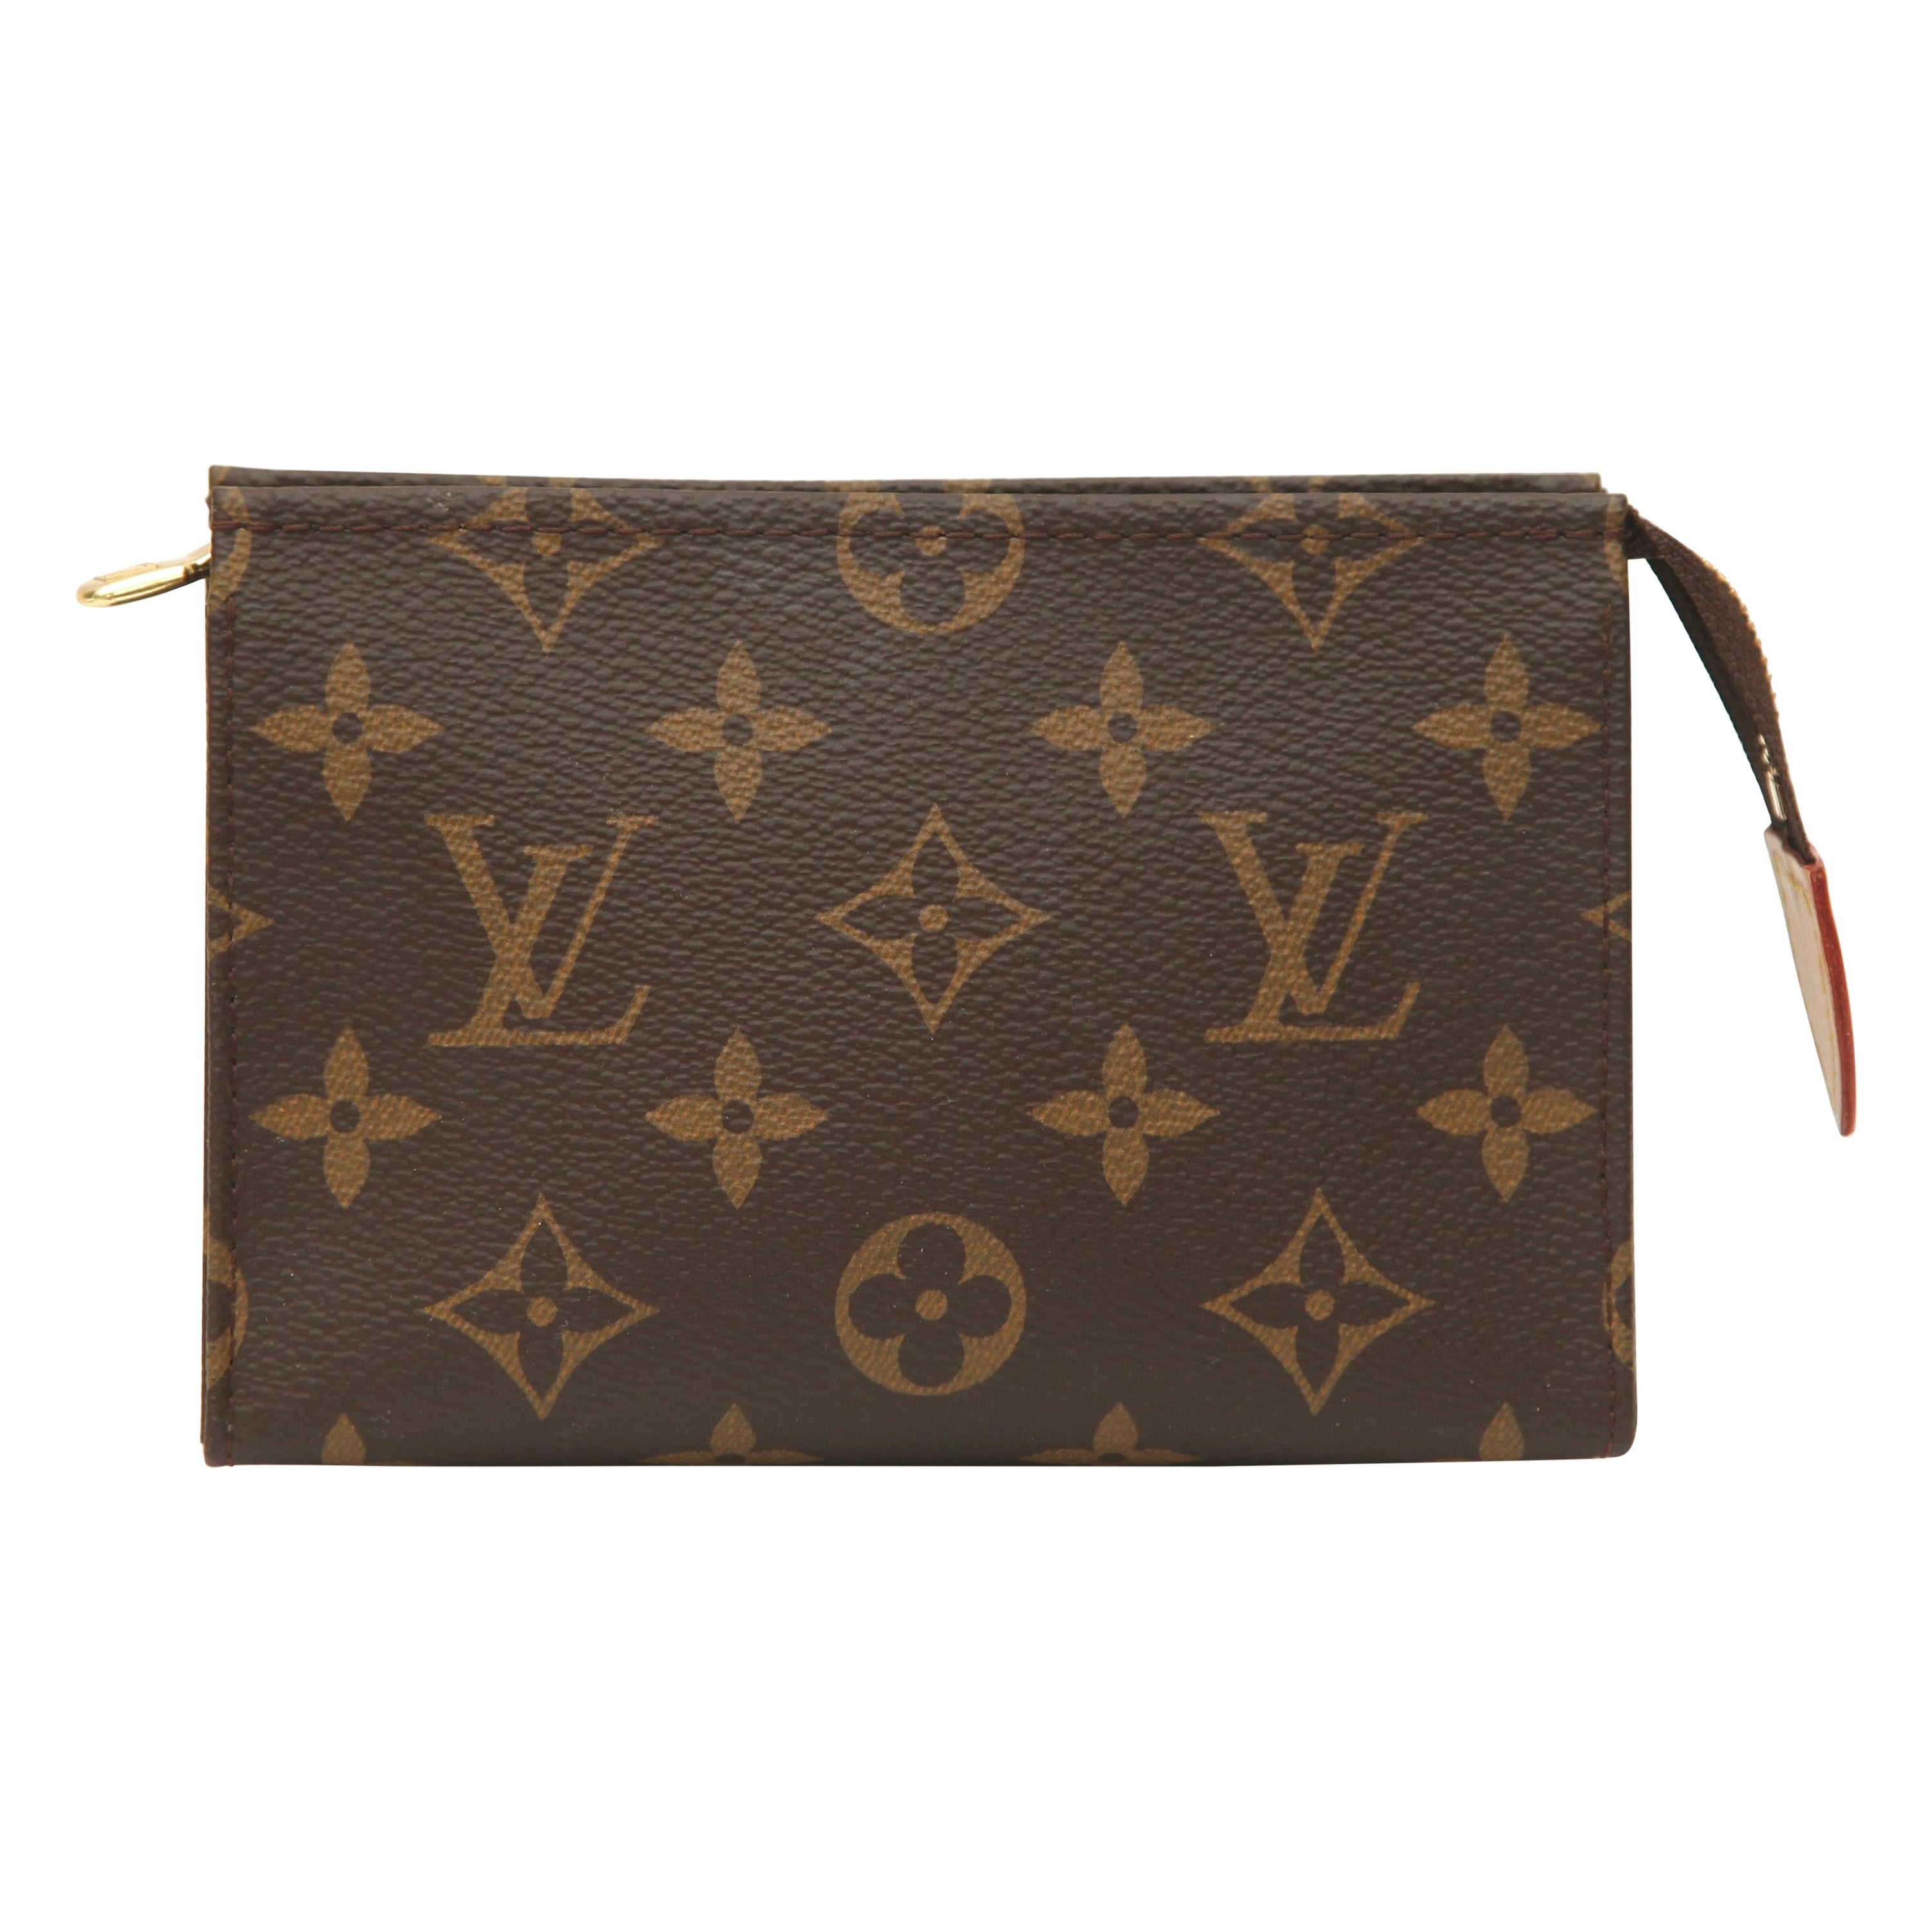 Louis Vuitton Toiletry Pouch 15 In Monogram SOLD